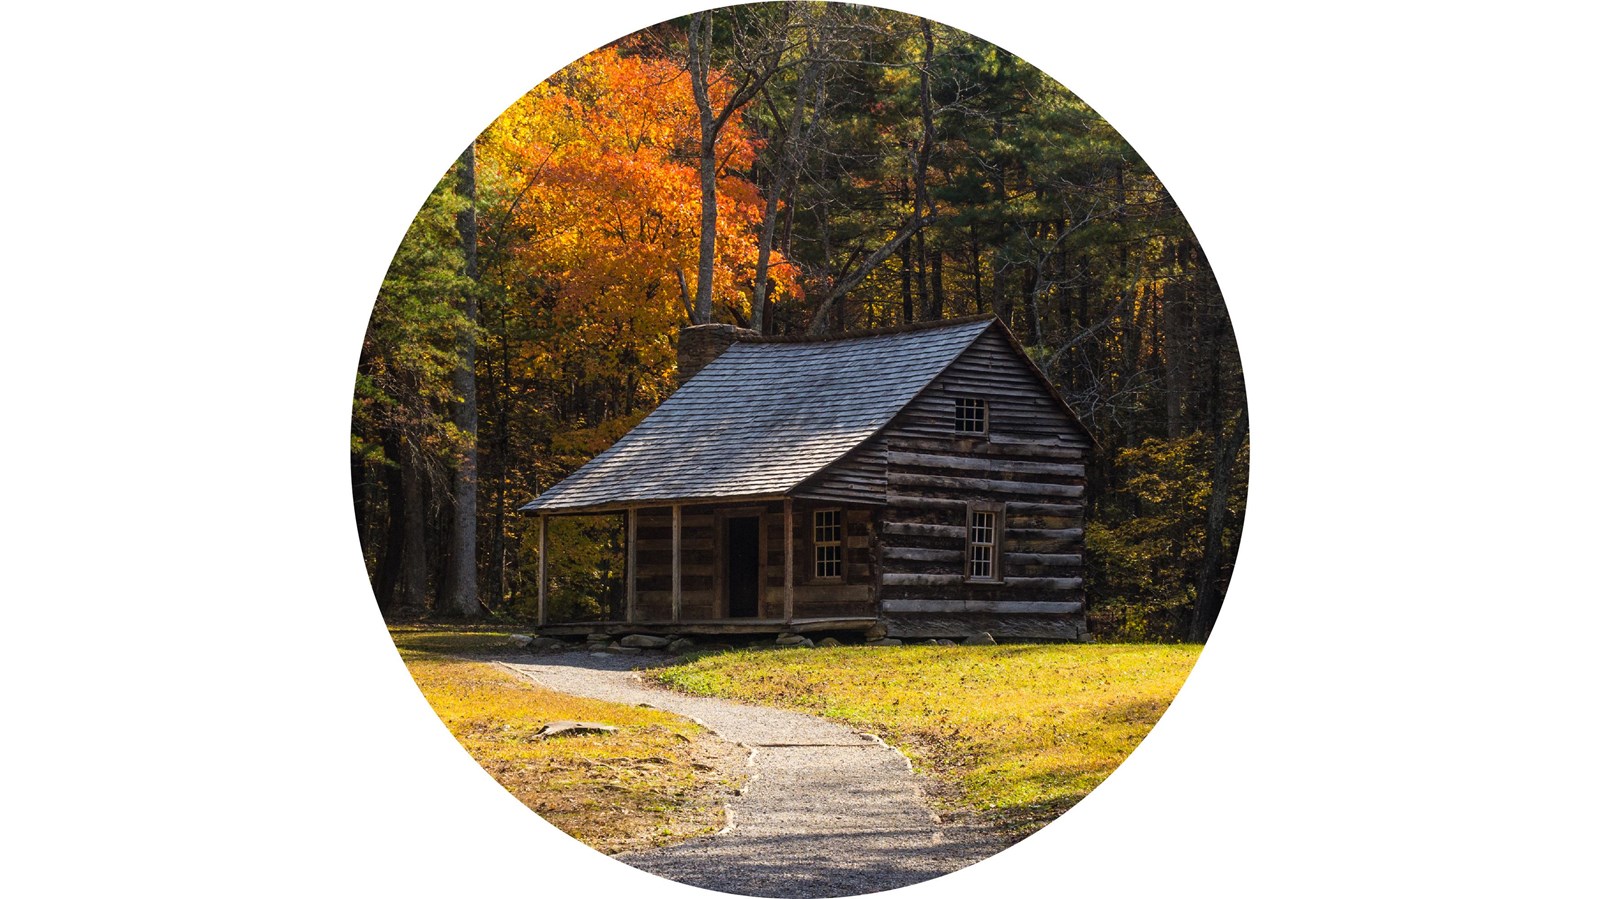 A rustic log cabin sits in a forest clearing surrounded by fall-colored trees.